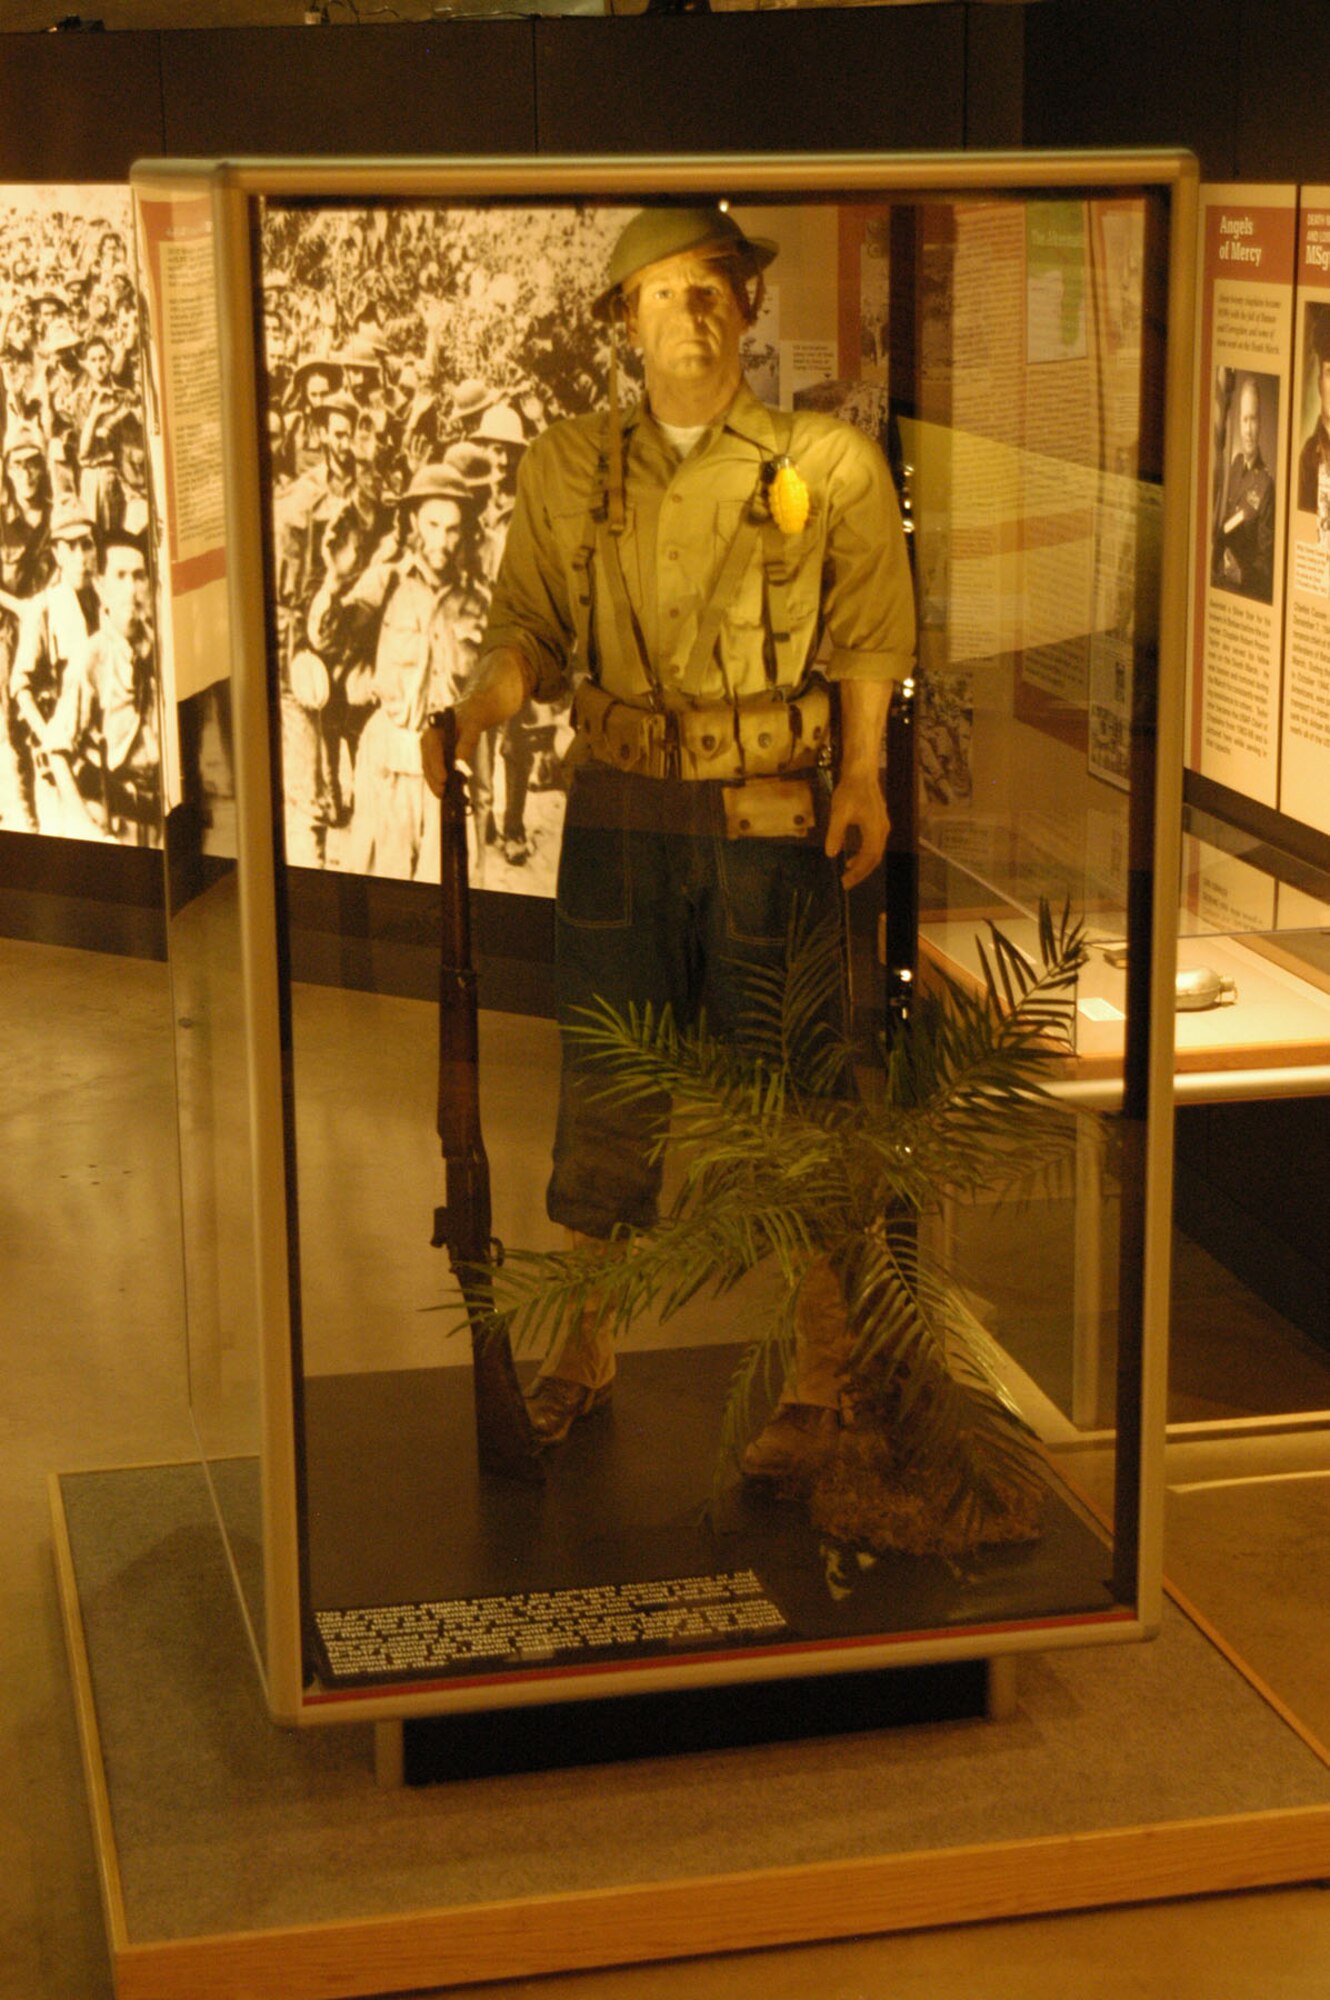 DAYTON, Ohio - Makeshift uniform worn by personnel on the ground during World War II on display in the World War II Gallery at the National Museum of the U.S. Air Force. (U.S. Air Force photo)